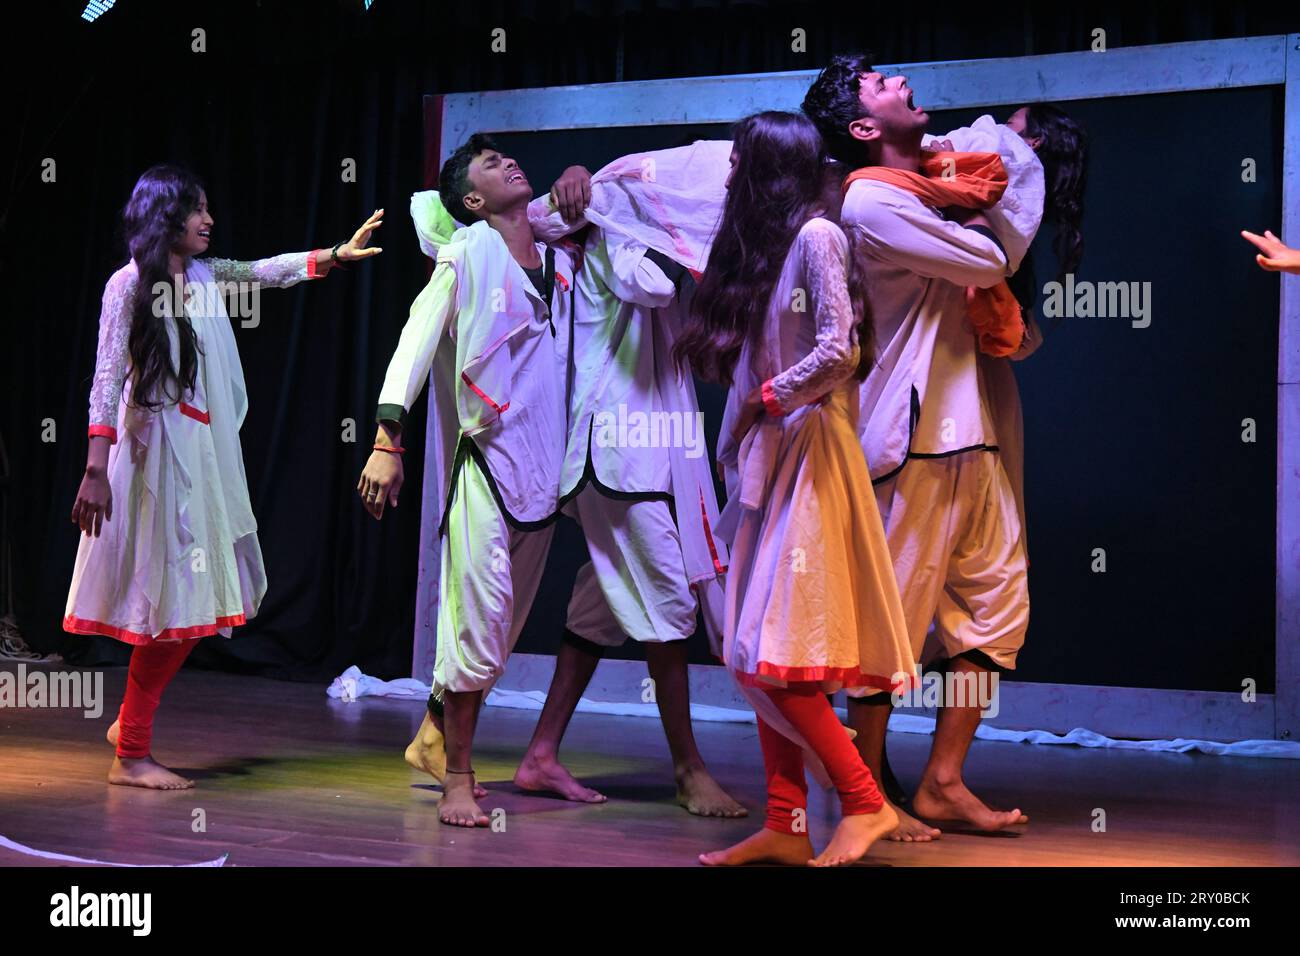 School students of the '+2 High School', Barhiya, Lakhisarai, Bihar, performing the 'Akhir Kyun', a science drama with the broad theme of ‘Science and Technology for the Benefit of Mankind’, during the Eastern India Science Drama Competition that organized by Birla Industrial & Technological Museum. They won the second position among five other team. (Photo by Biswarup Ganguly/Pacific Press) Stock Photo